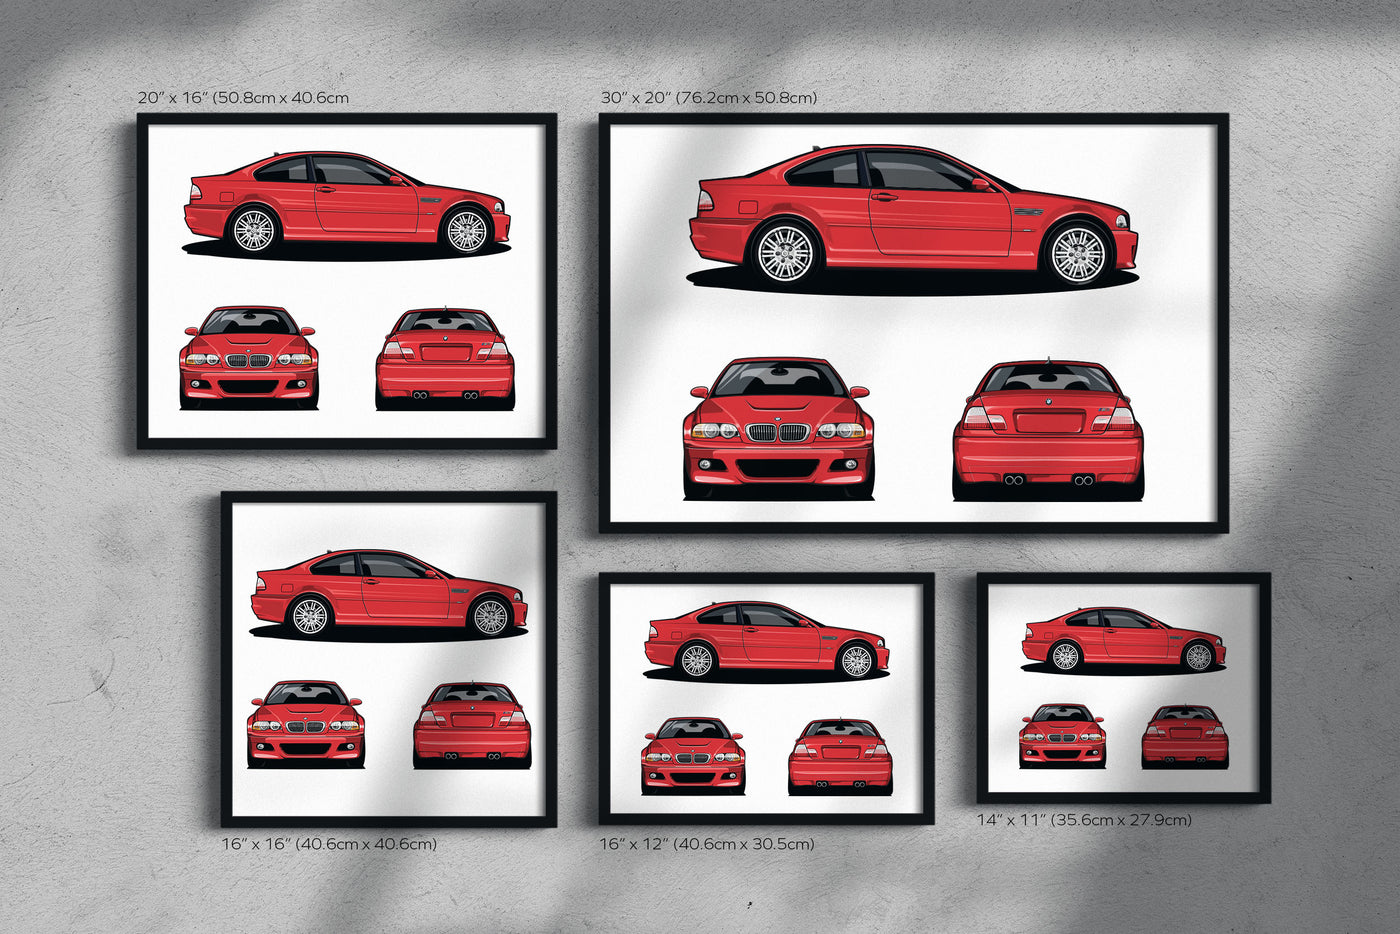 Framed BMW M3 3 Series (E46) Imola Red Side Front Rear Profile Poster Wall Art